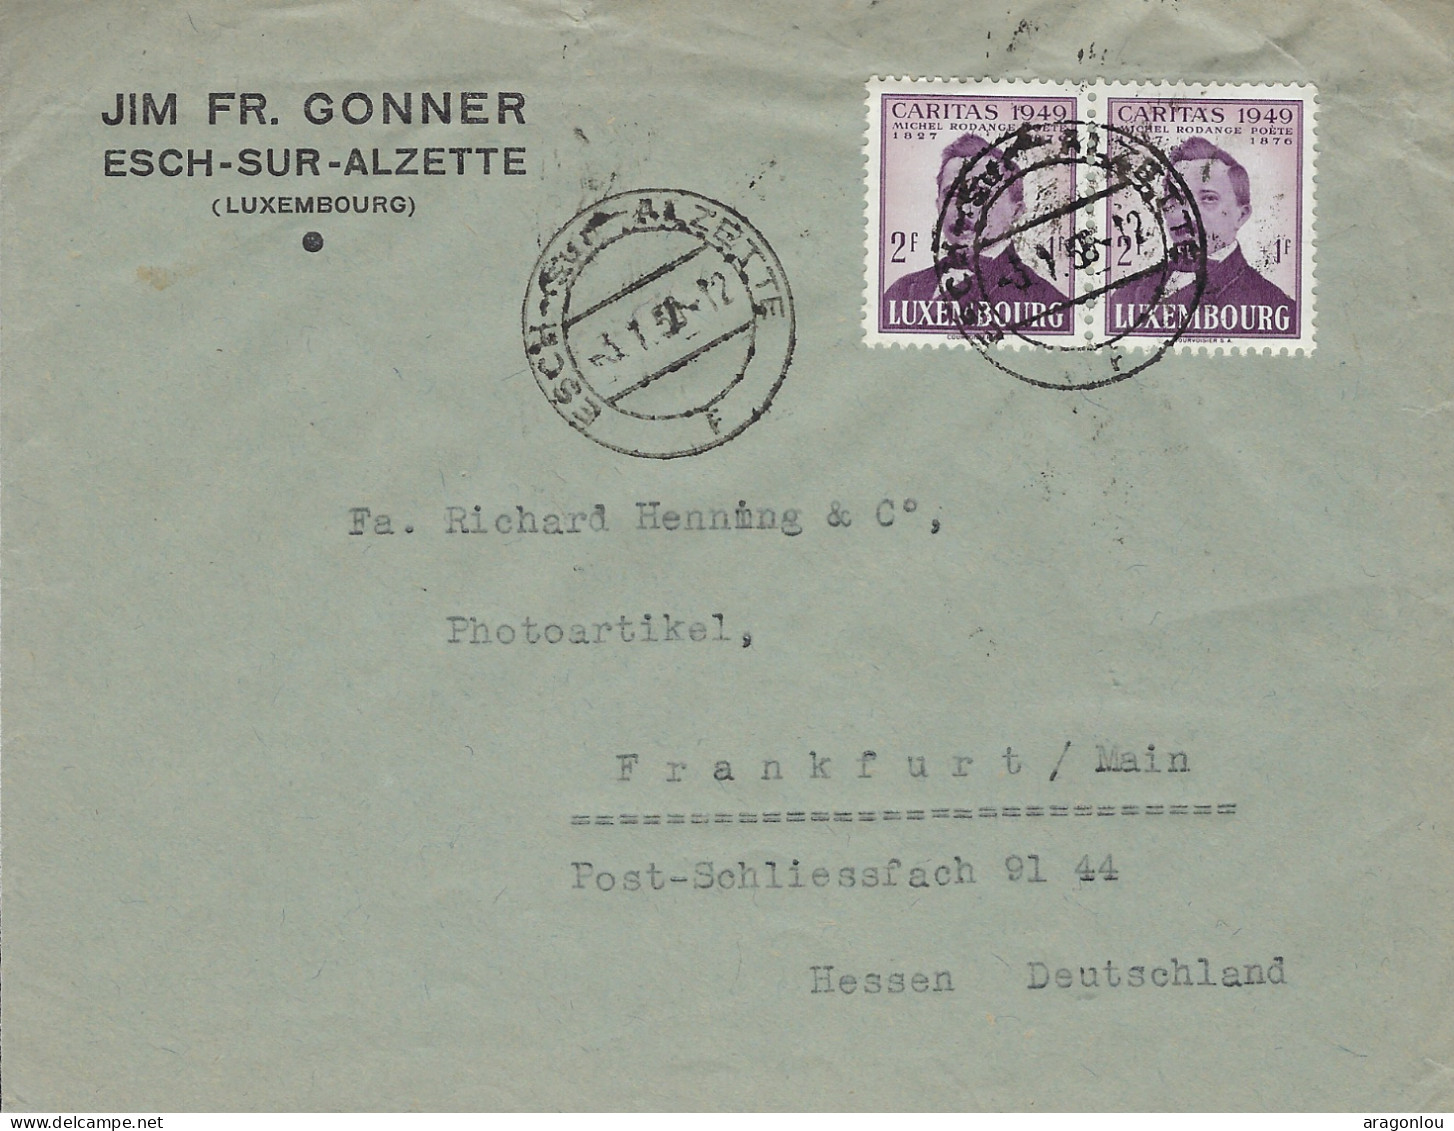 Luxembourg - Luxemburg - Lettre Recommandé 1949  An Fa. Richard Henning , Frankfurt - Covers & Documents